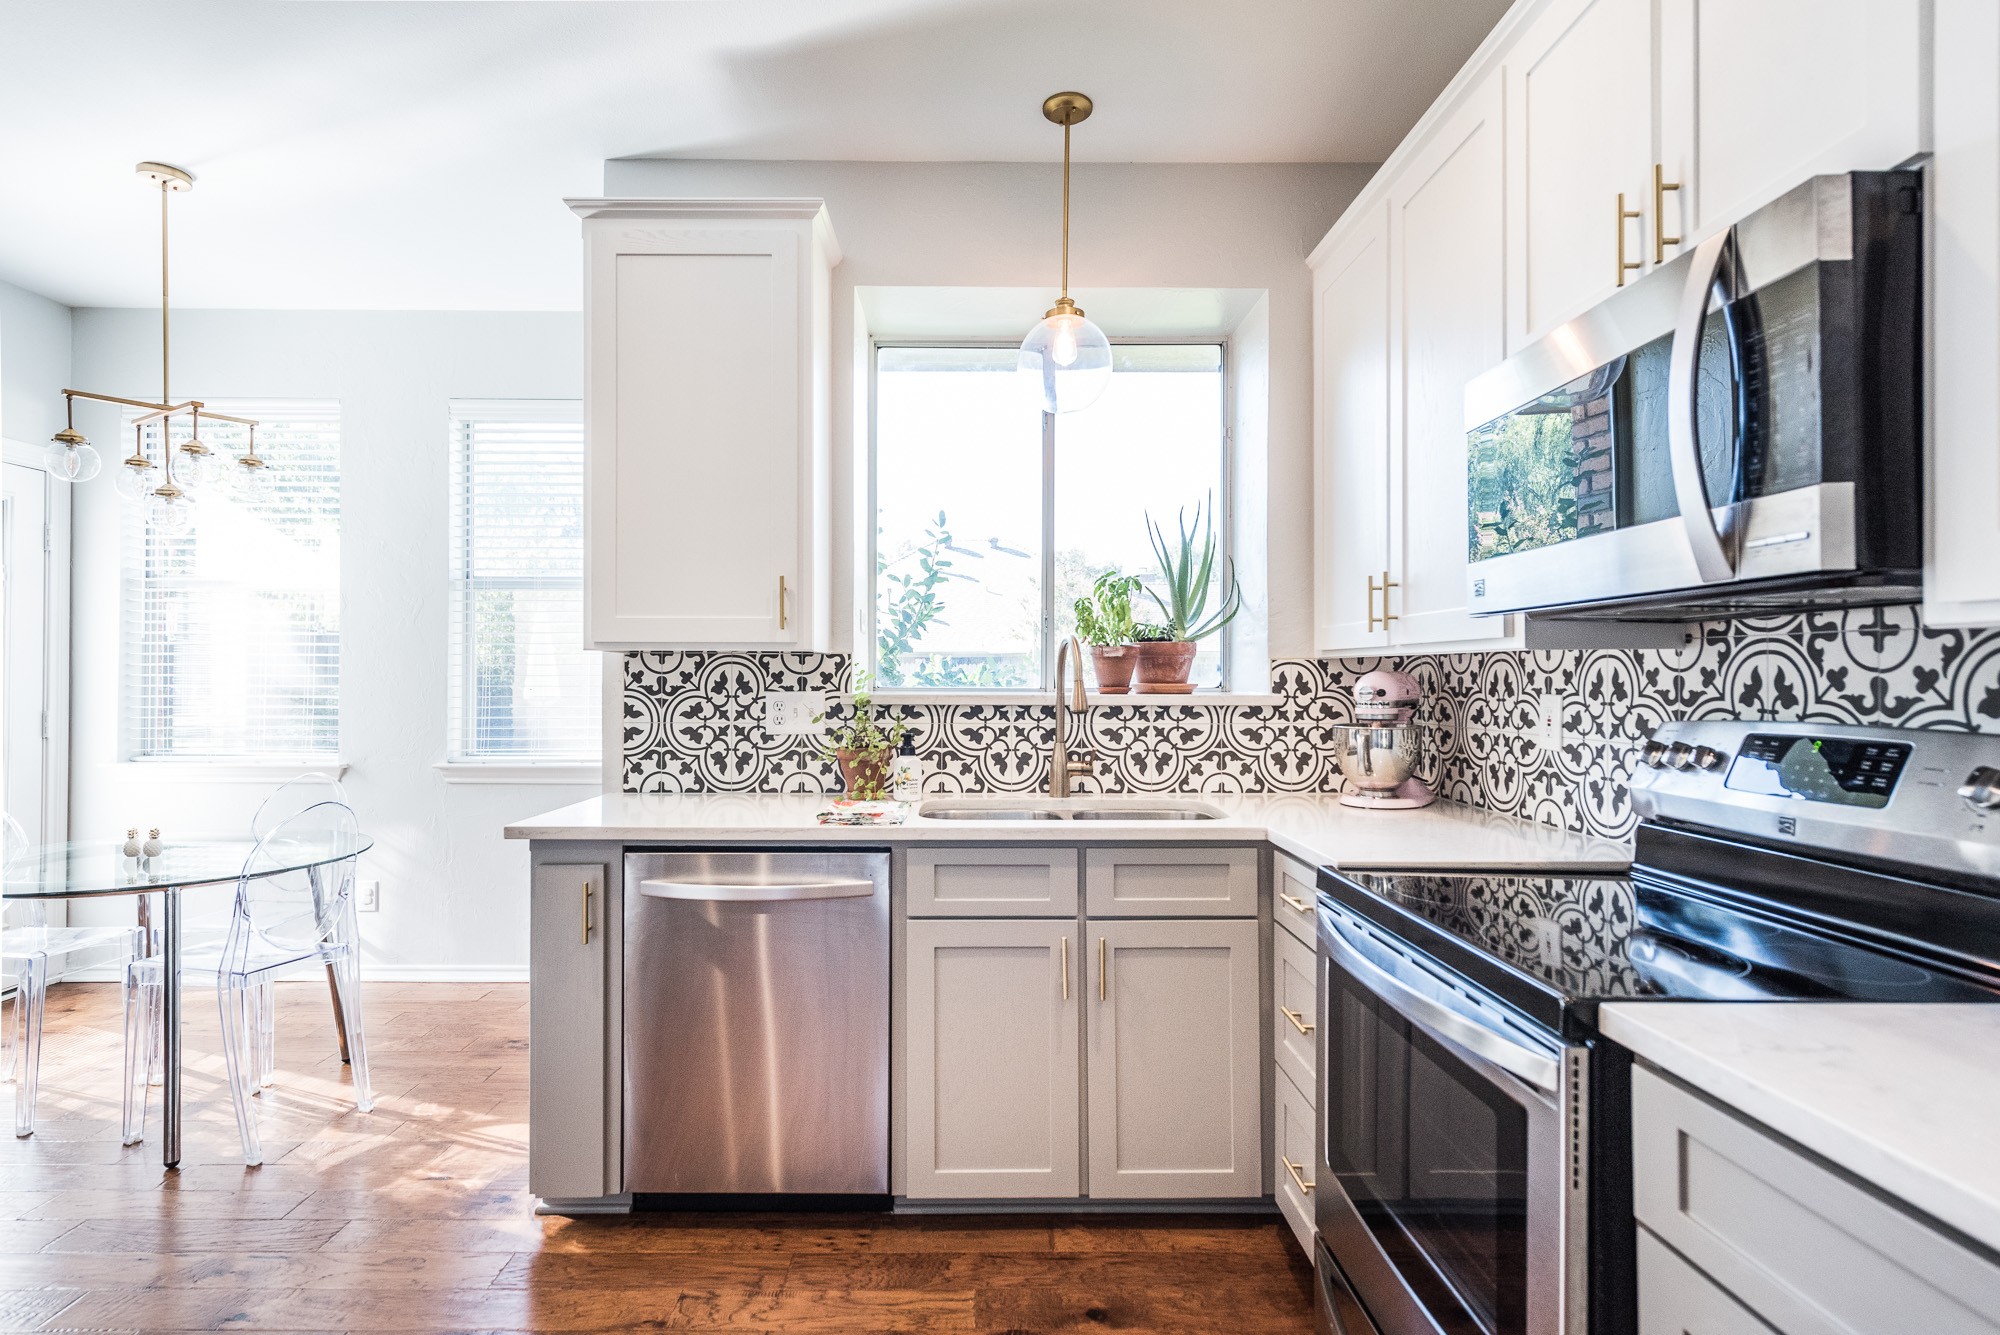 Denton Texas, Denton contractor, Denton renovation, Denton remodeler, kitchen remodel, kitchen renovation, kitchen before and after, can lighting, LED lighting, hardwood floors, quartz counters, white counters, white kitchen, custom cabinets, shaker cabinets, gold hardware